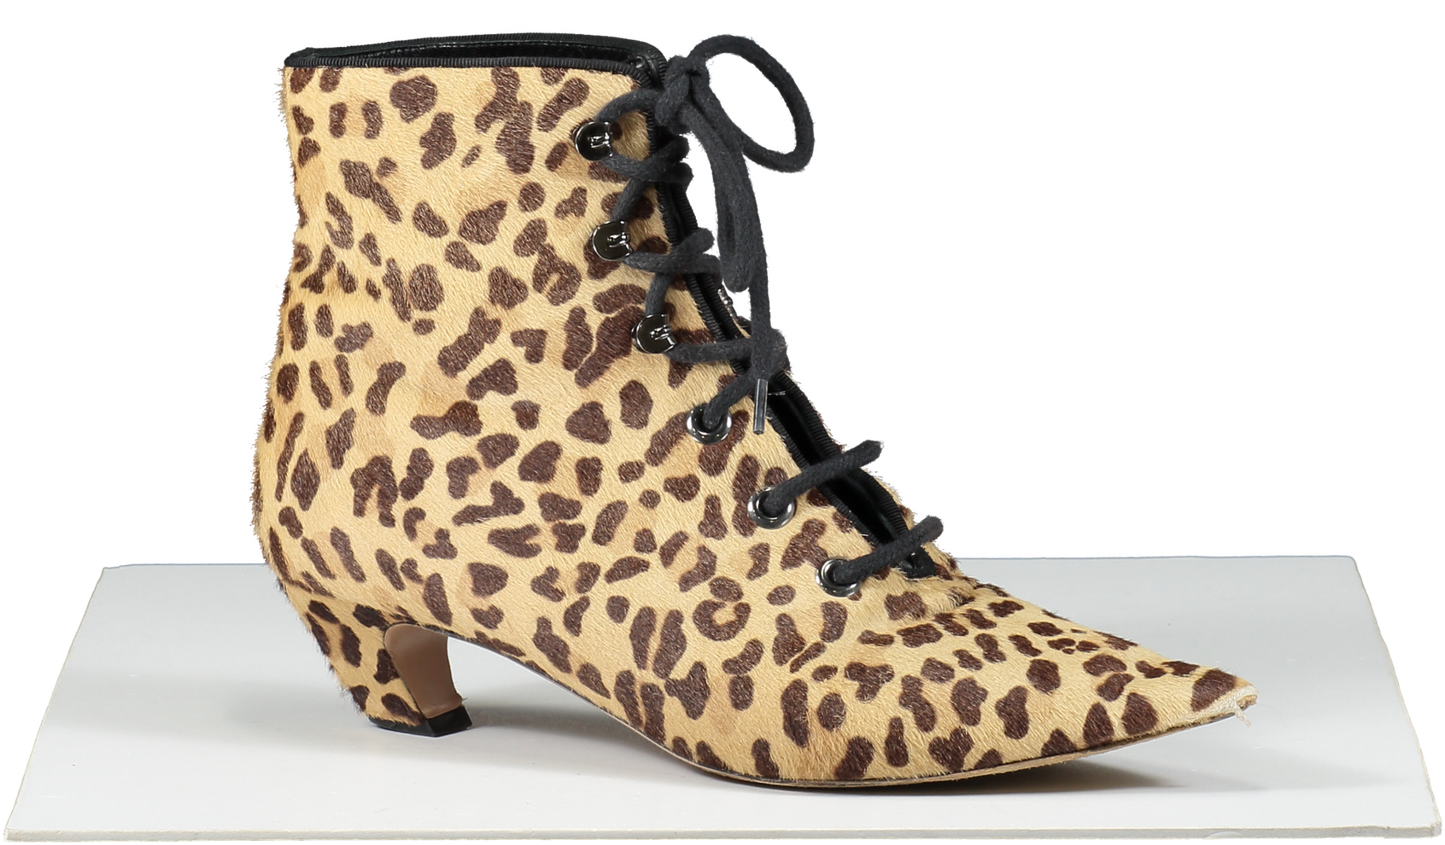 Dior Brown Lace Up Kitten Heel Ankle Boots- Leopard Print UK 5.5 EU 38.5 👠